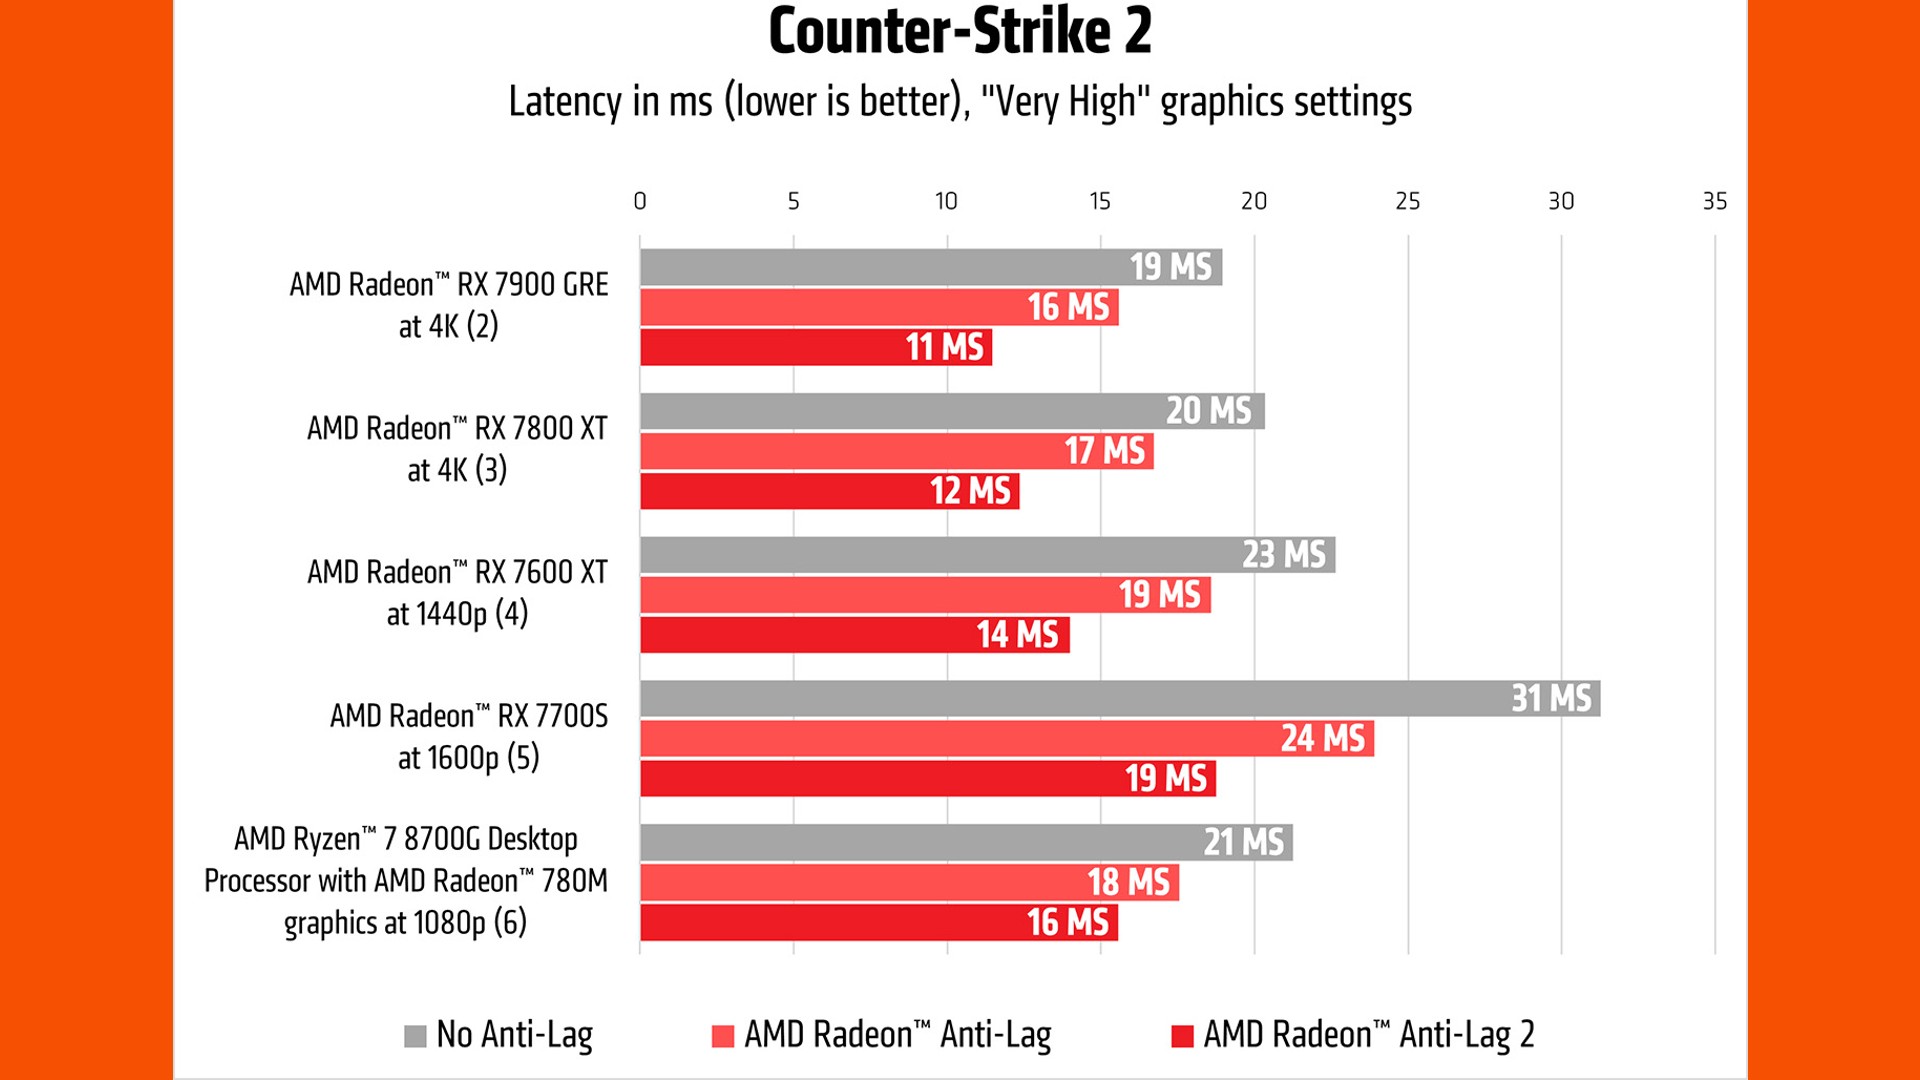 AMD Anti-Lag 2 results from CS2